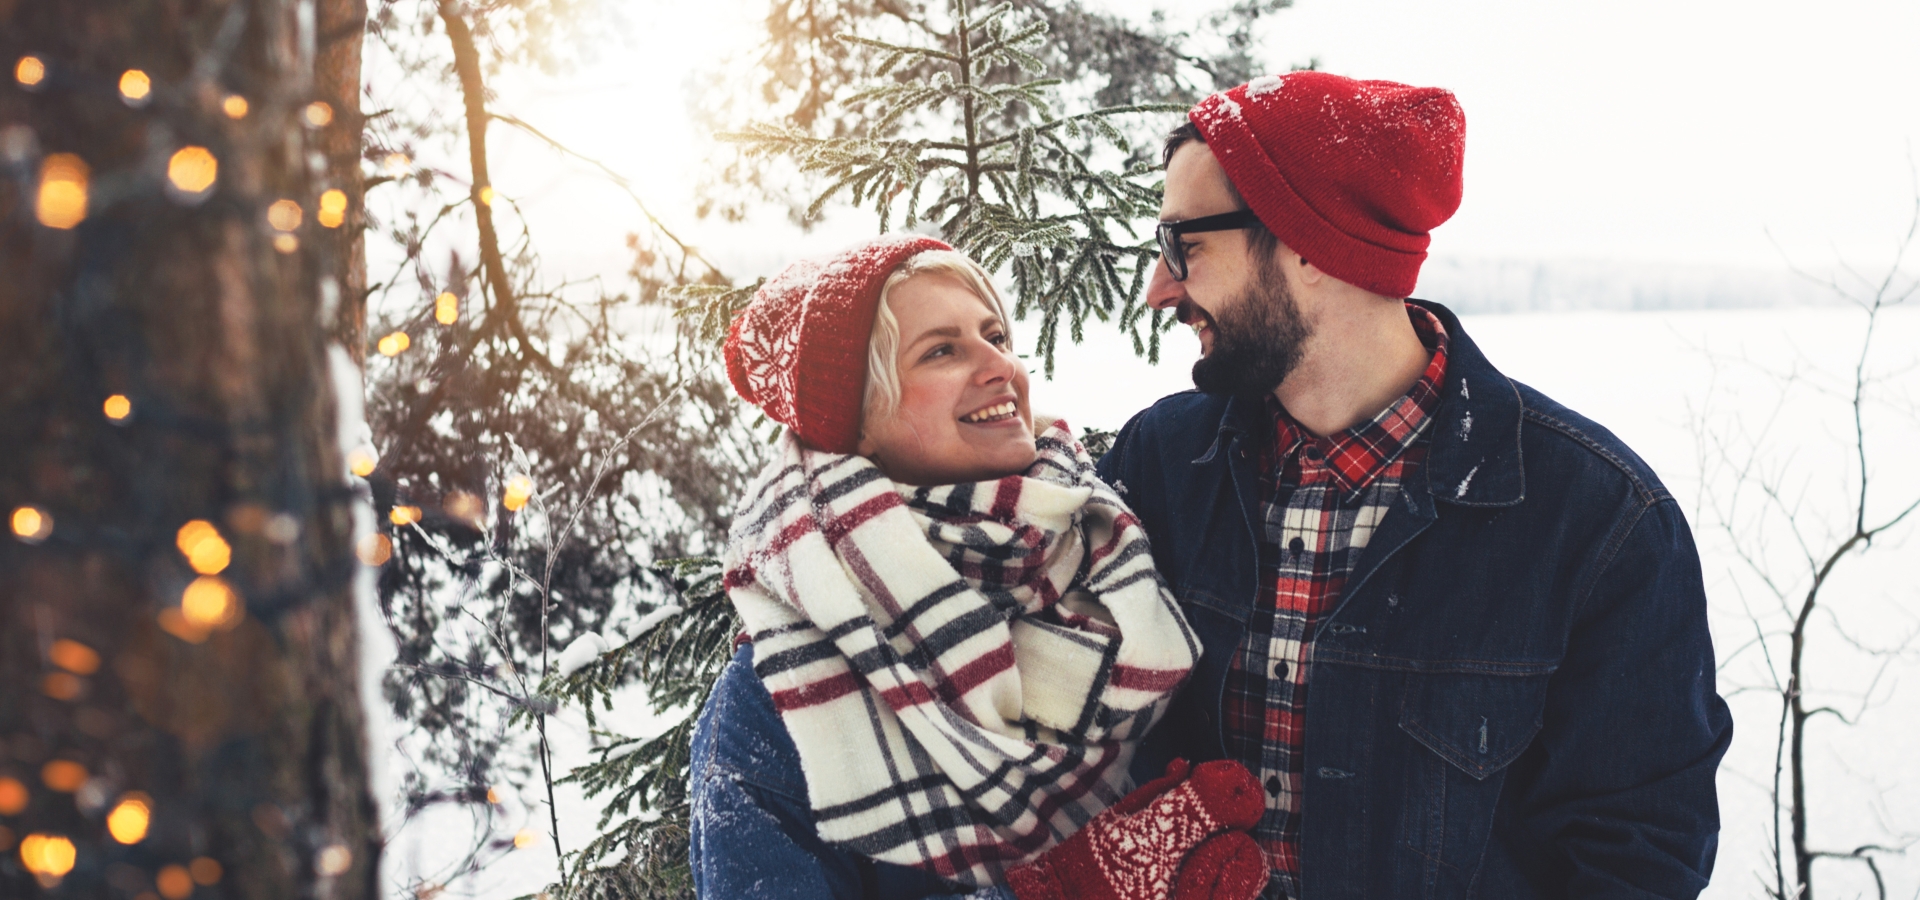 Beautiful couple in winter clothes walking along snowy forest. Woman wearing red hat, checkered scarf and mittens. Man in glasses and jean jacket